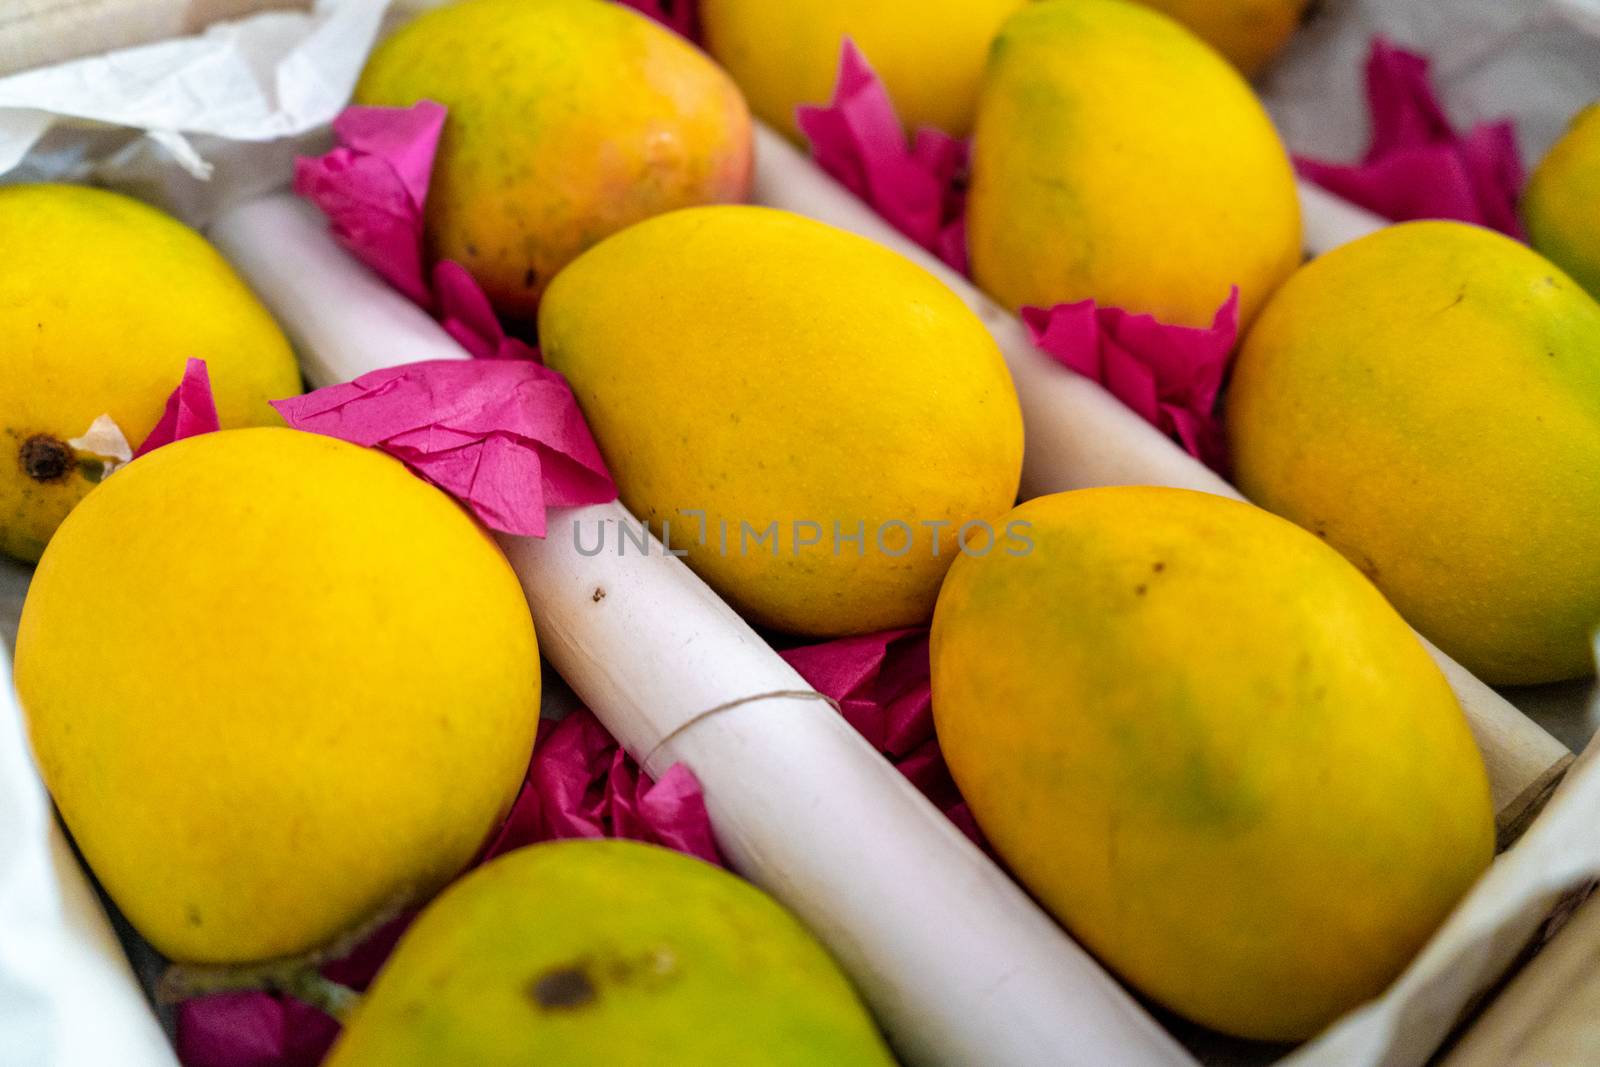 shot of ripe yellow green mangoes placed on white paper and covered with think pink butter paper ready to sell and serve. This tasty sweet and very popular summer fruit is widely consumed in india in shakes, as juice and eaten raw by people